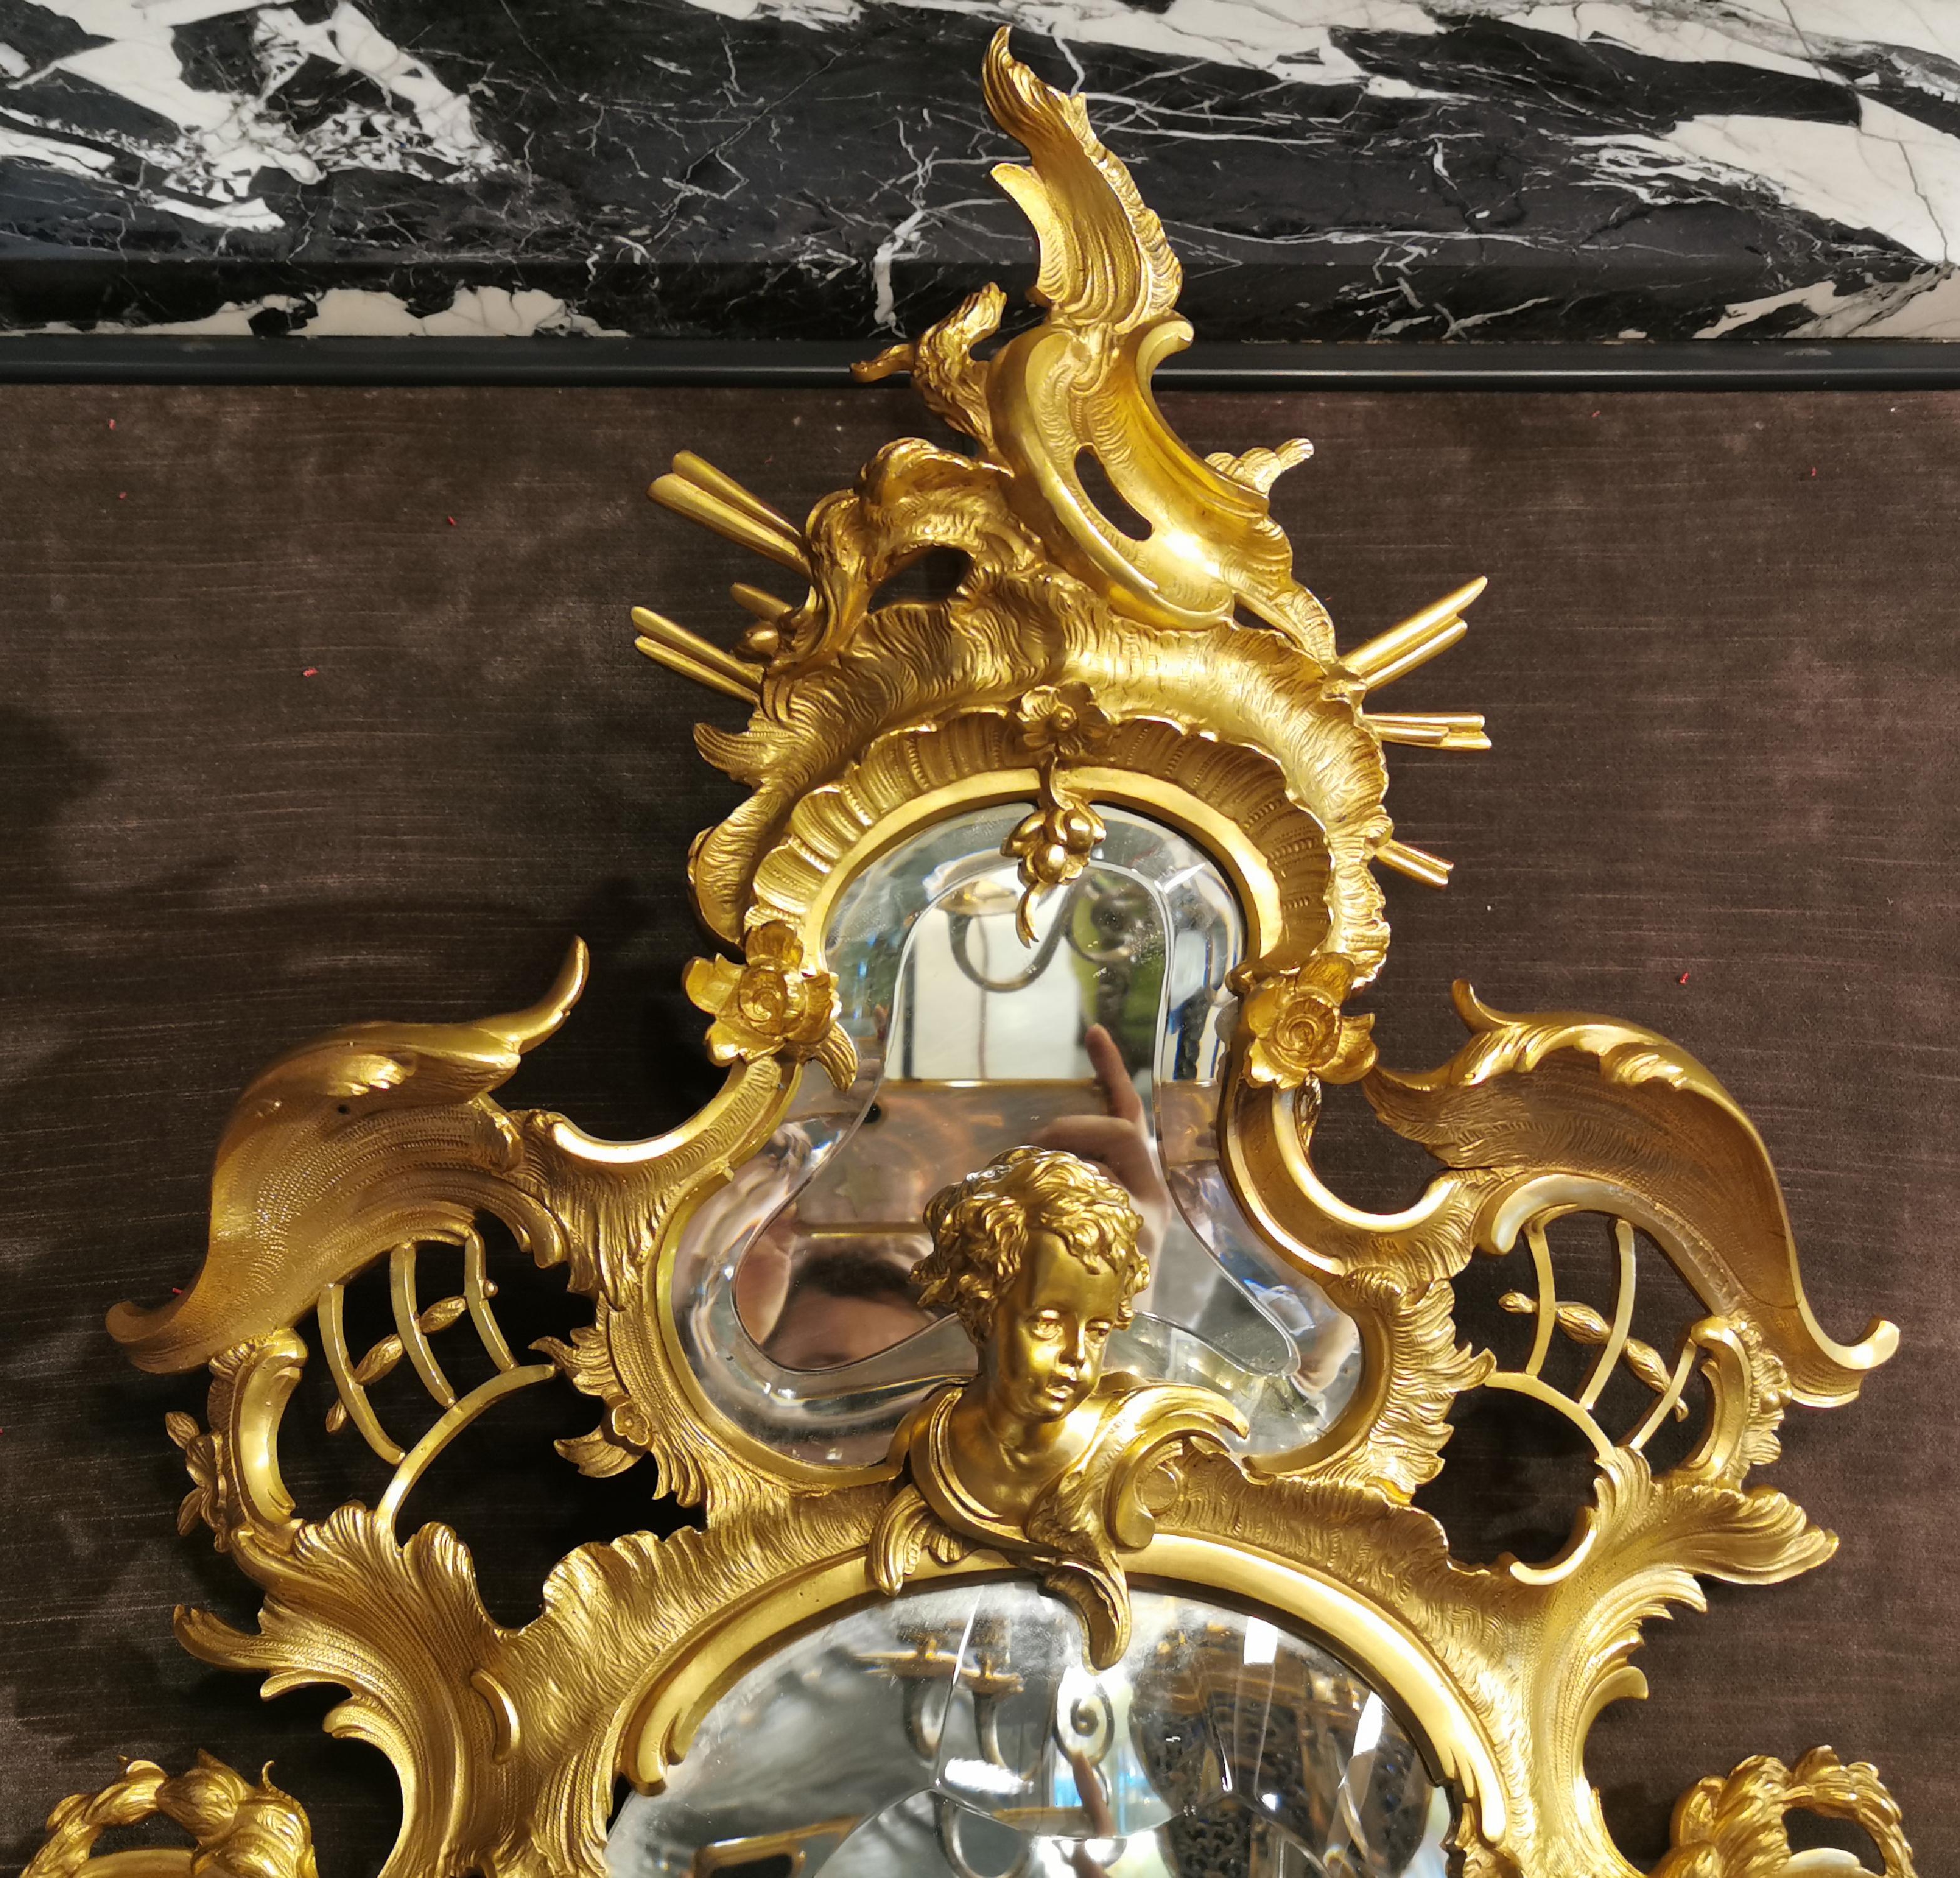 This very rich Napoleon III style mirror was made of gilt bronze in the second half of the 19th century.
The curved and countercurved frame with a very Rococo decoration frames two mirrors with beveled glass. In this decoration composed mainly with